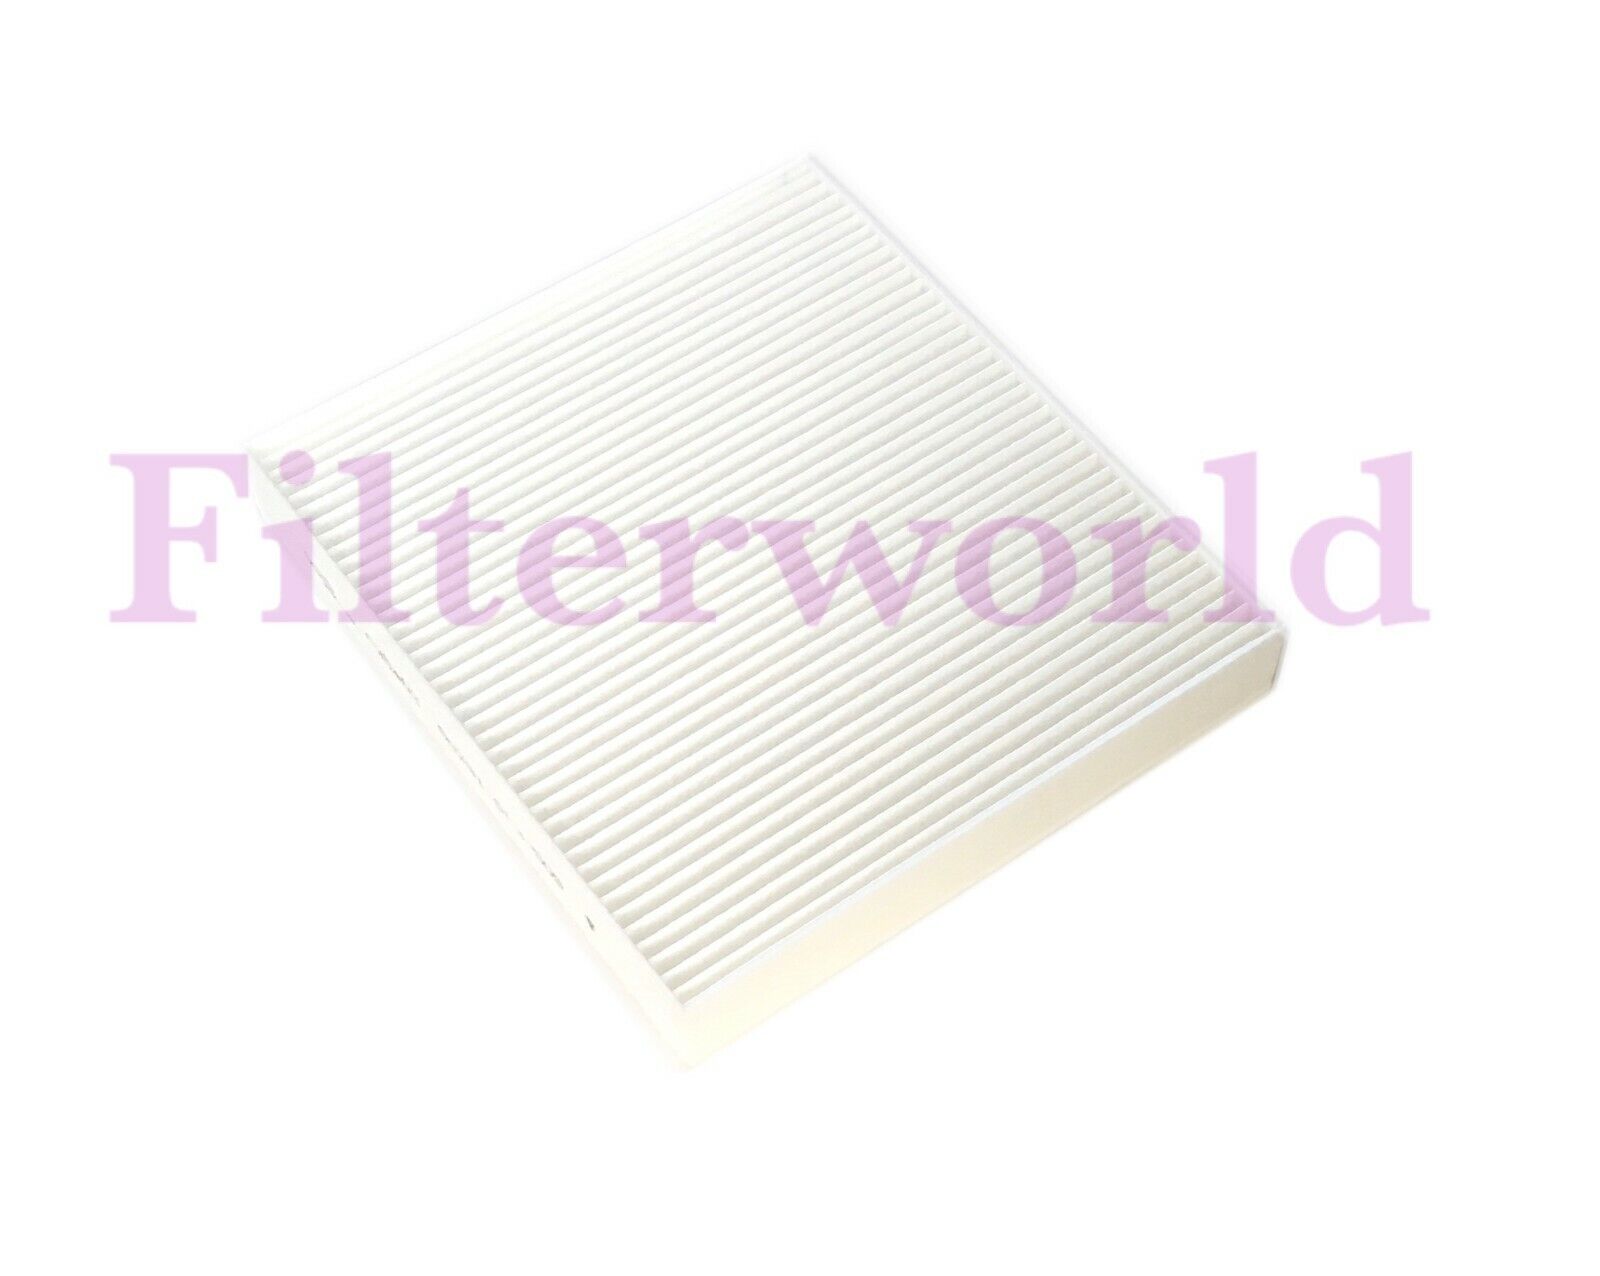 Cabin Air Filter For GS450h 2014-2019 IS350 2014-2021 RC350 2015-2021 US SELLER